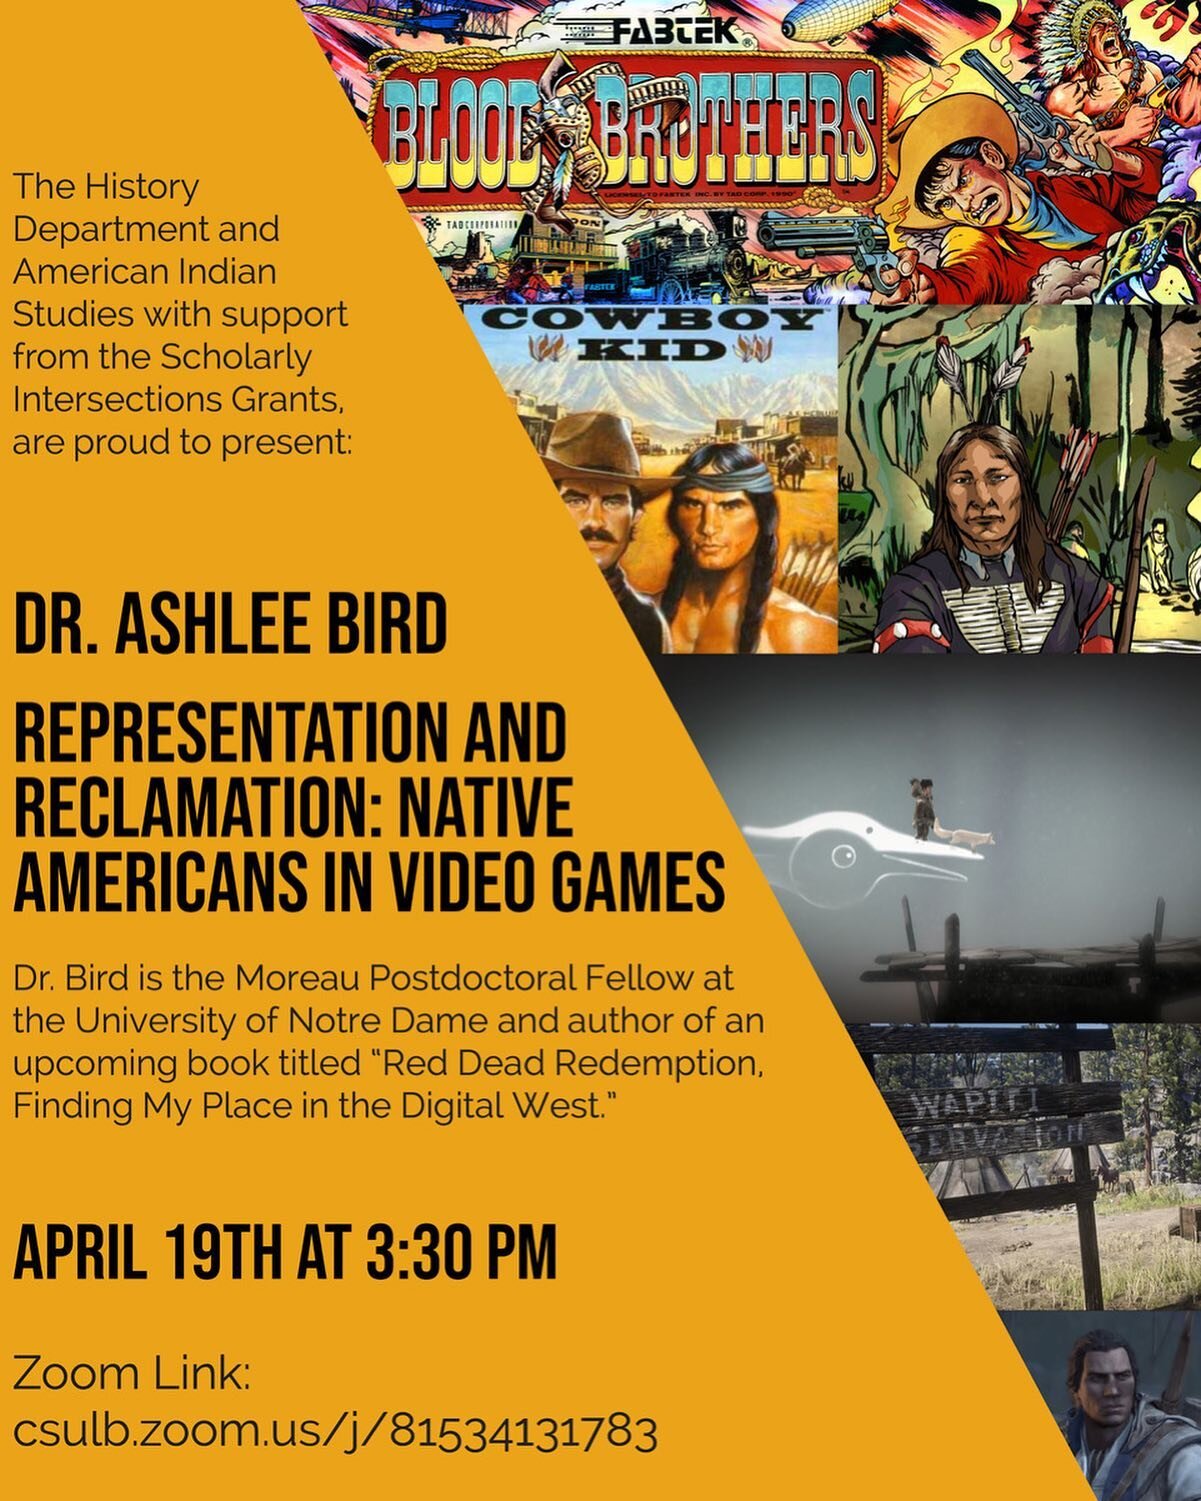 Dr. Ashlee Bird will join us to discuss how Native Americans are represented in video games both old and new. Please join us on zoom for this exciting talk! #gameshistory #videogames #history #retrogames #research @csulbalumni @csulbasi